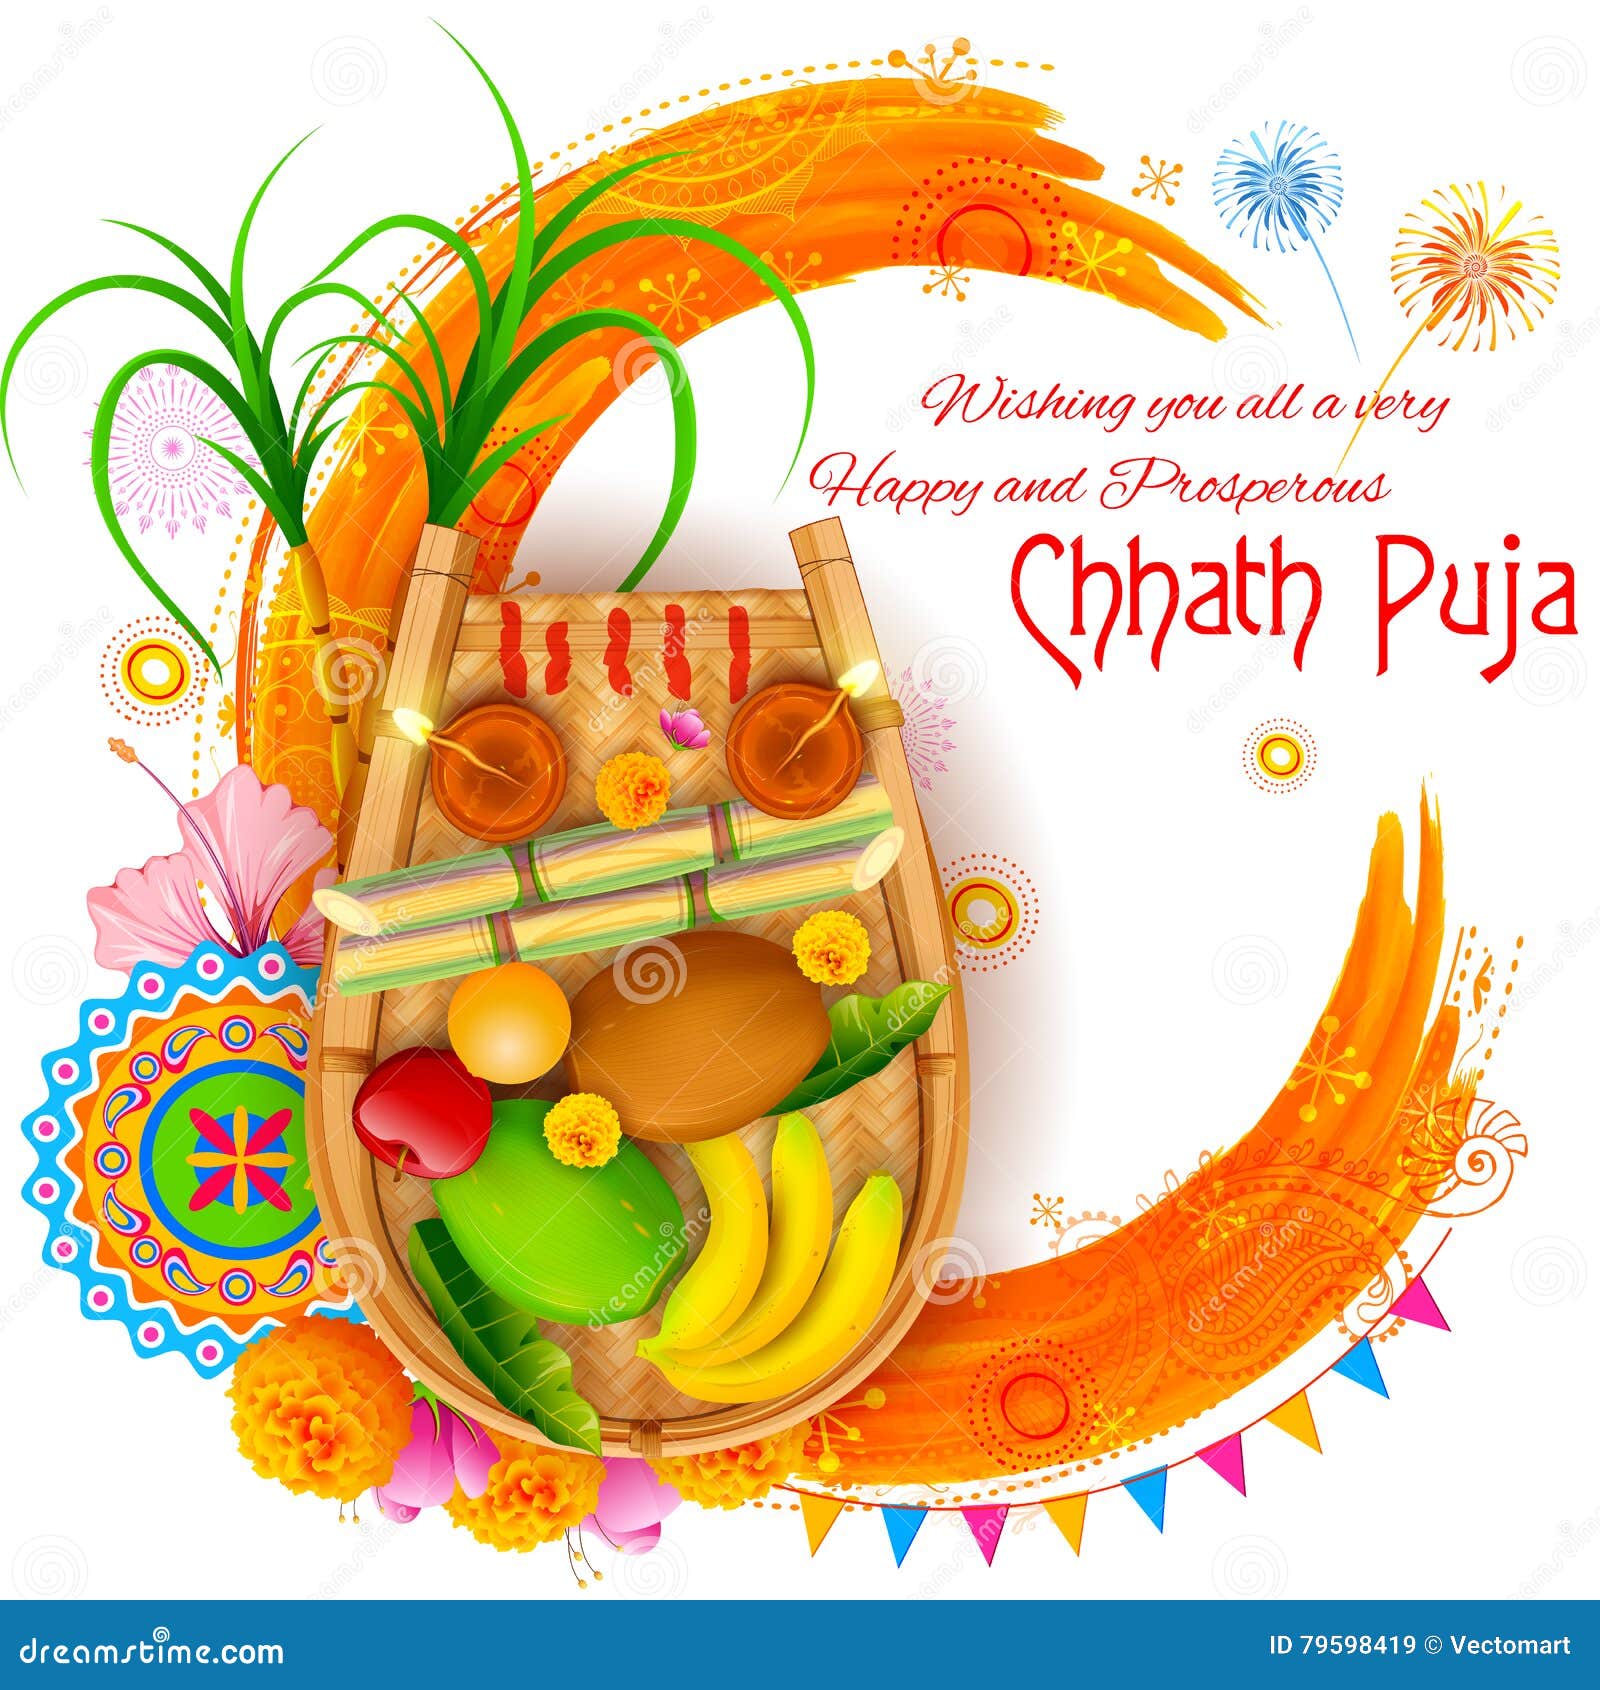 Happy Chhath Puja 2019 Wishes Facebook messages WhatsApp Statuses  greetings wallpapers  images  Books News  India TV